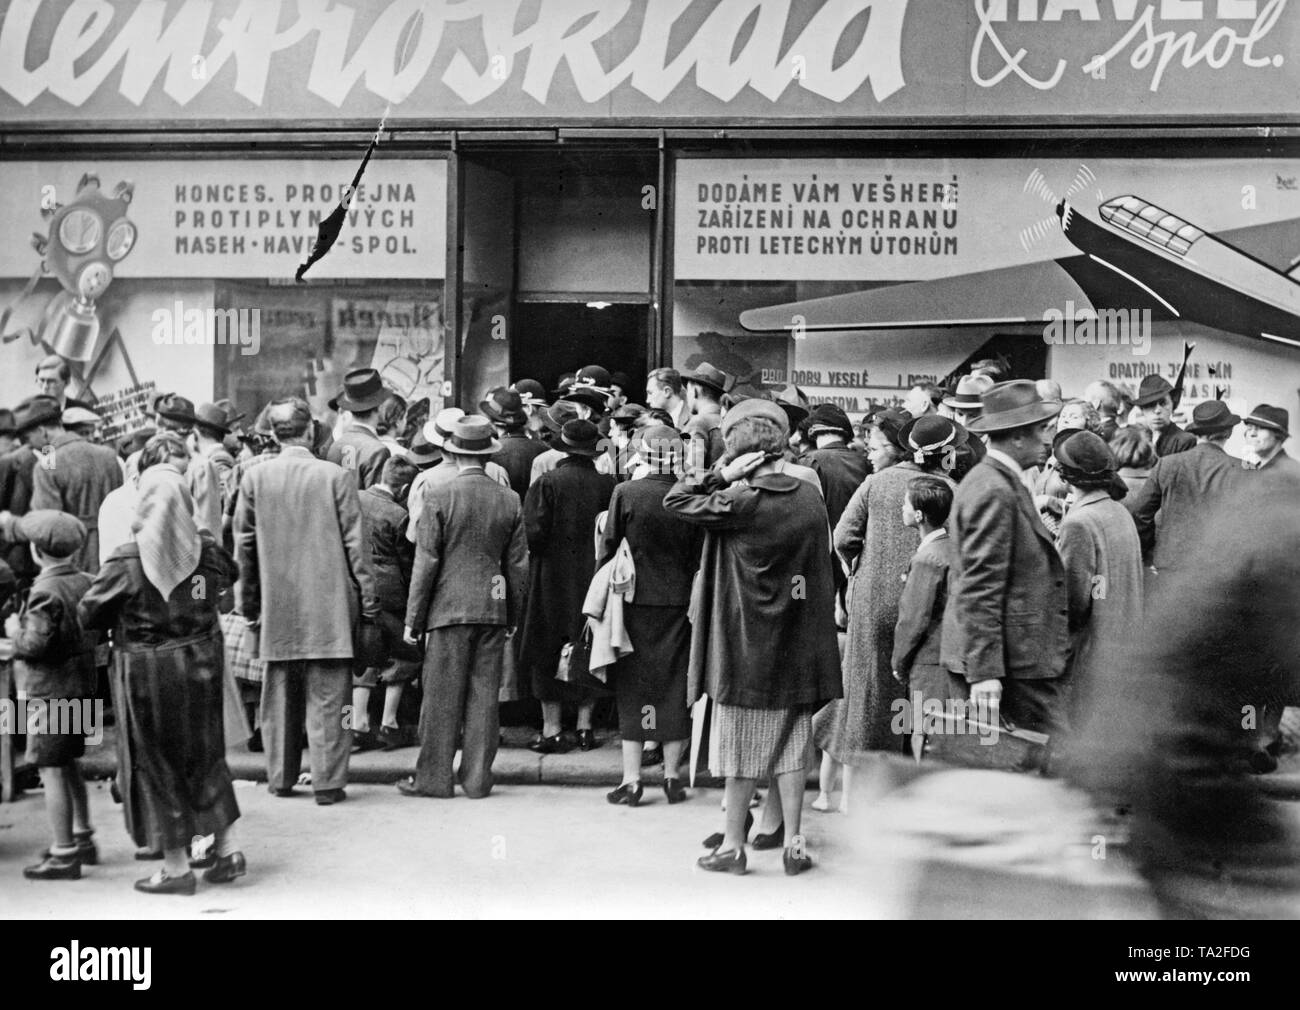 Mobilization of the Czechoslovak Army by President Benes. The population of Prague buys gas masks in case the war breaks out. According to the Munich Agreement in October 1938, Czechoslovakia had to cede the Sudeten German territories to the German Reich. Stock Photo